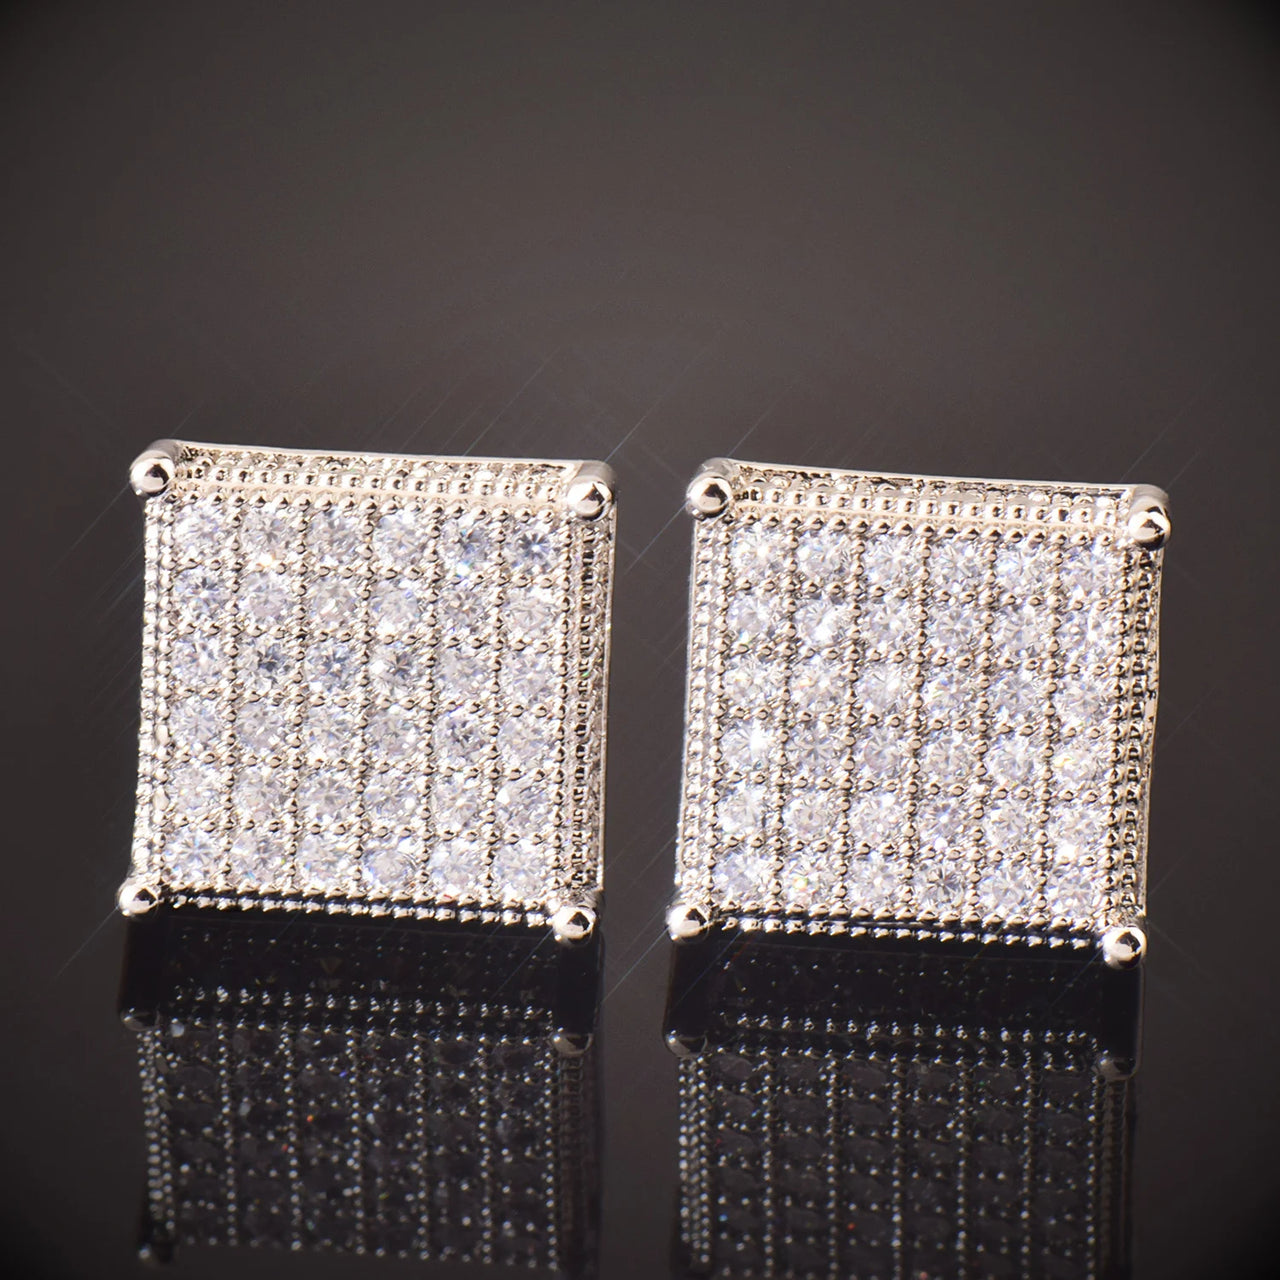 11mm Square Cut Pave Earrings - Different Drips